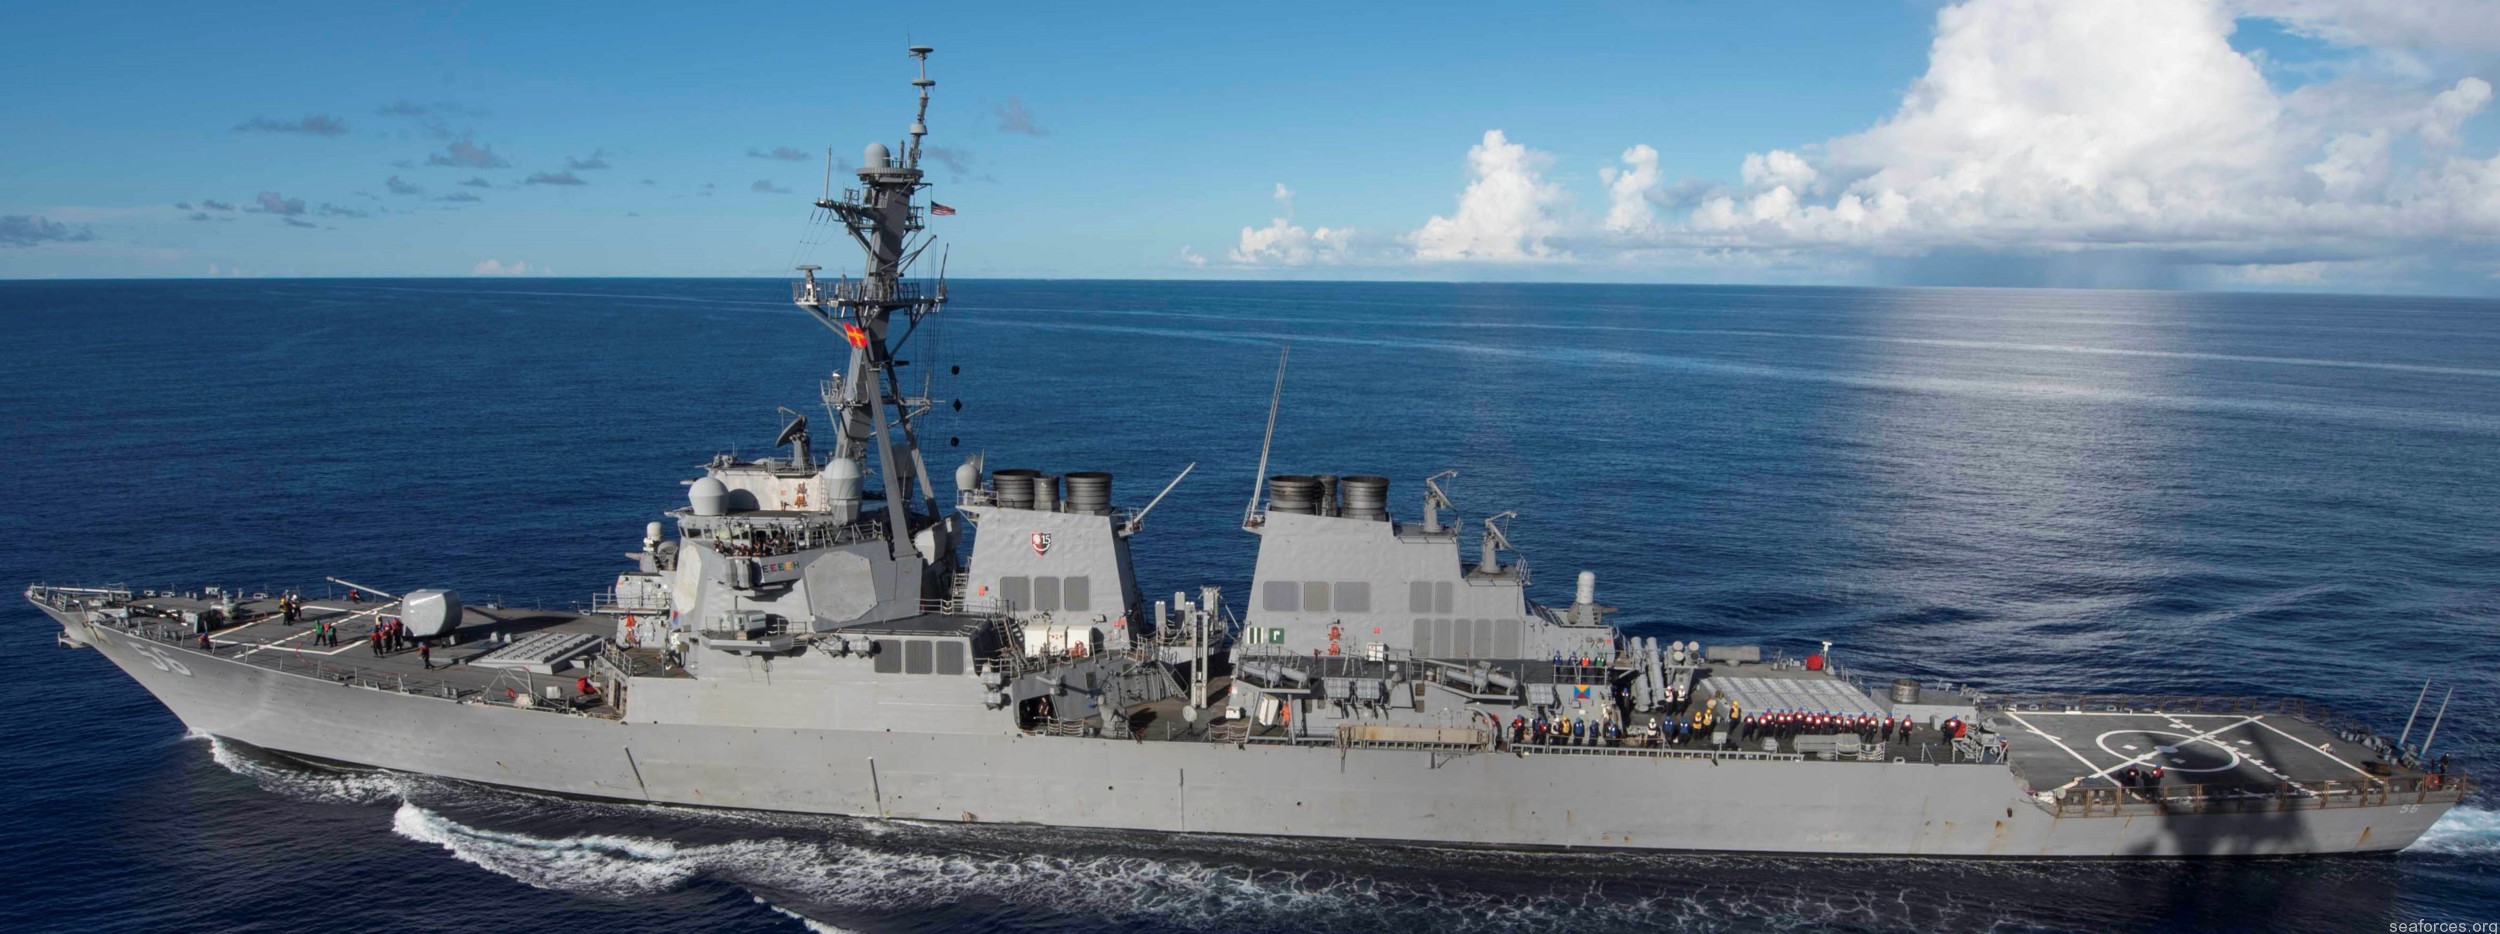 arleigh burke class guided missile destroyer us navy flight i 12